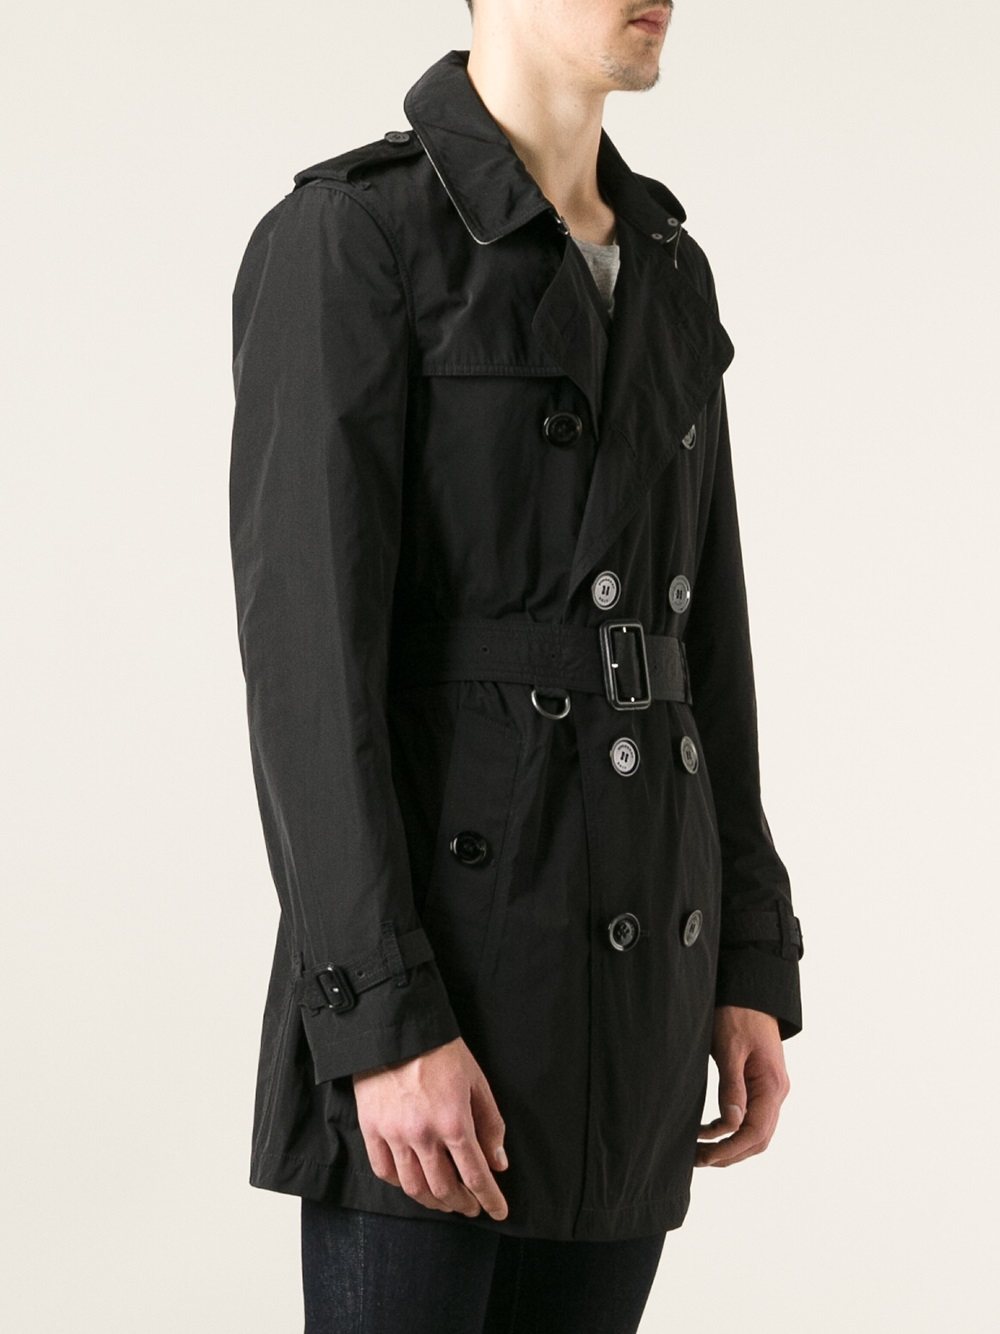 Burberry Brit Mid Length Trench Coat in Black for Men - Lyst